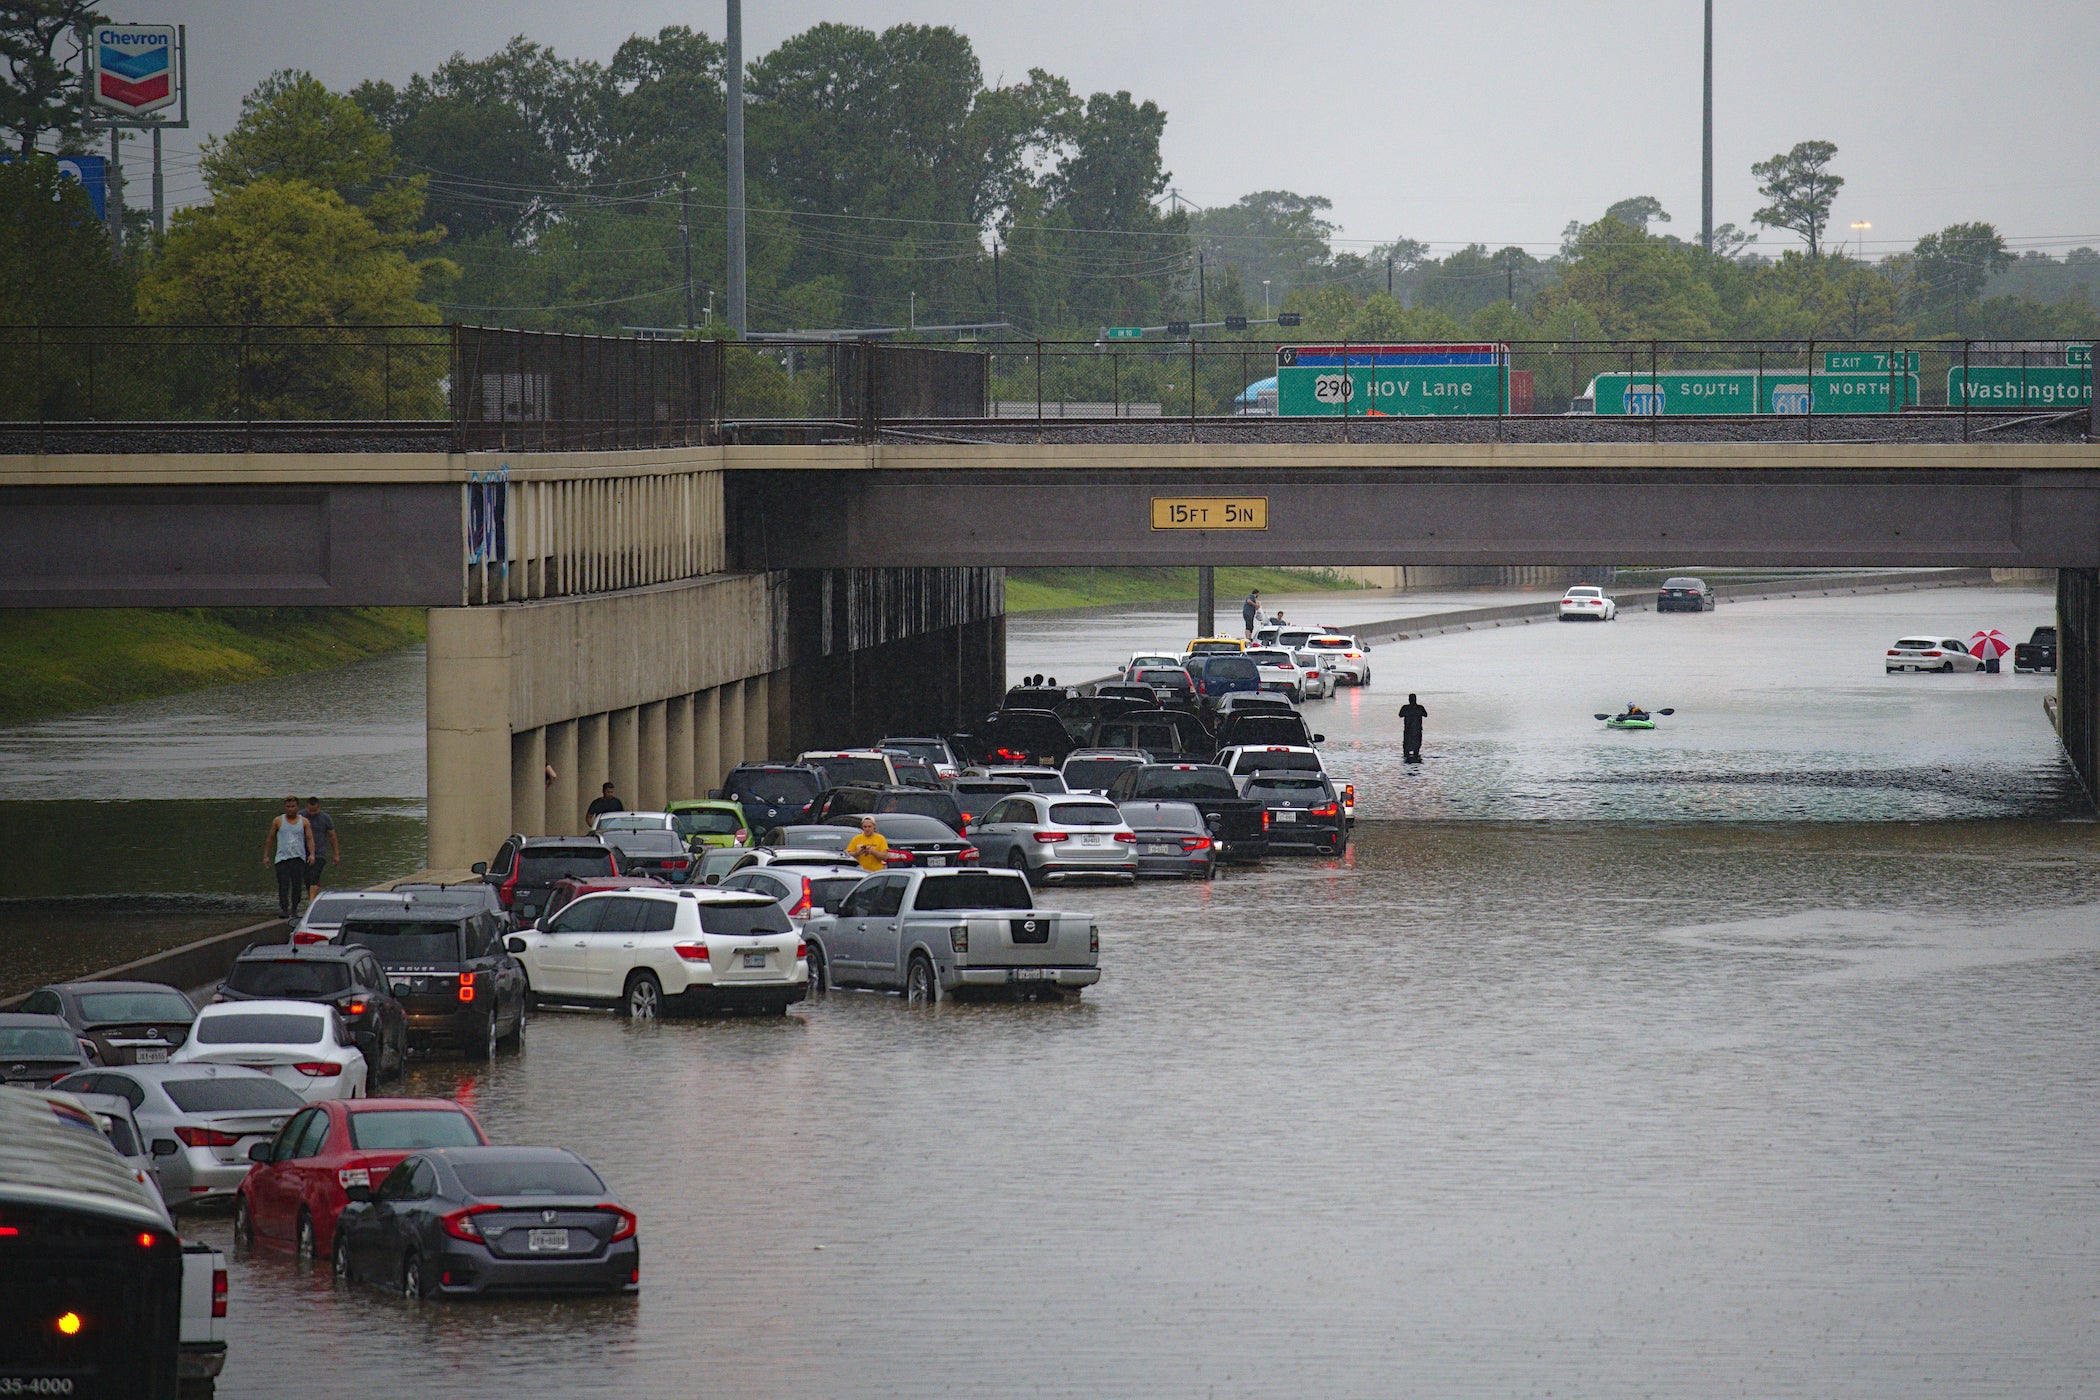 Photograph of many cars trying to drive through flooded area under a bridge.